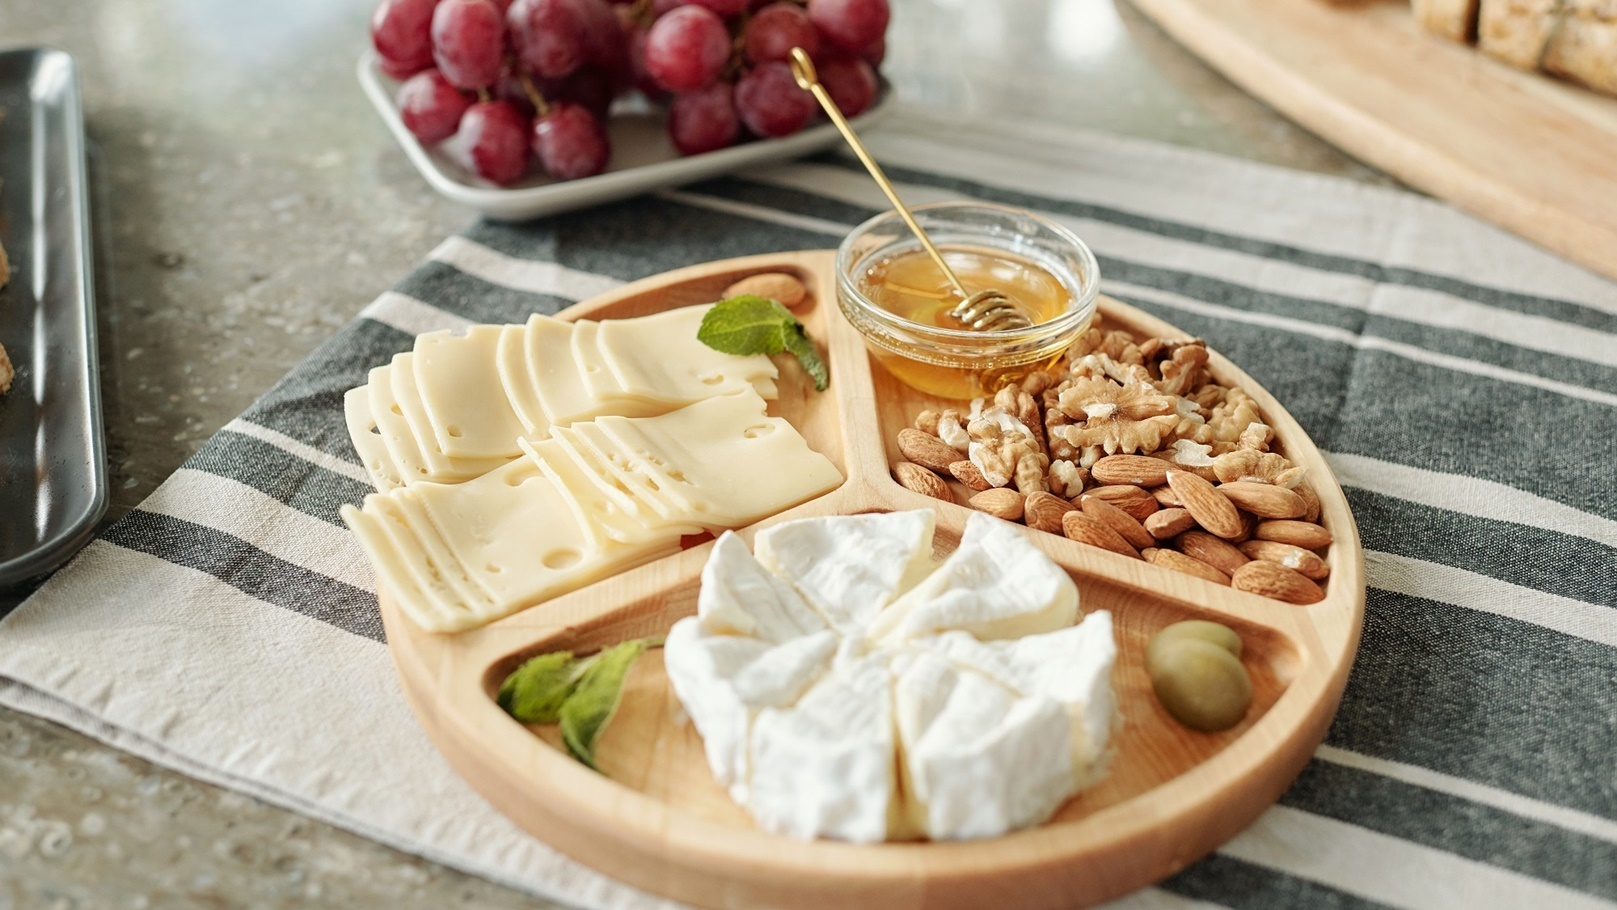 cheeses-and-nuts-snacks-2022-02-02-03-59-01-utc